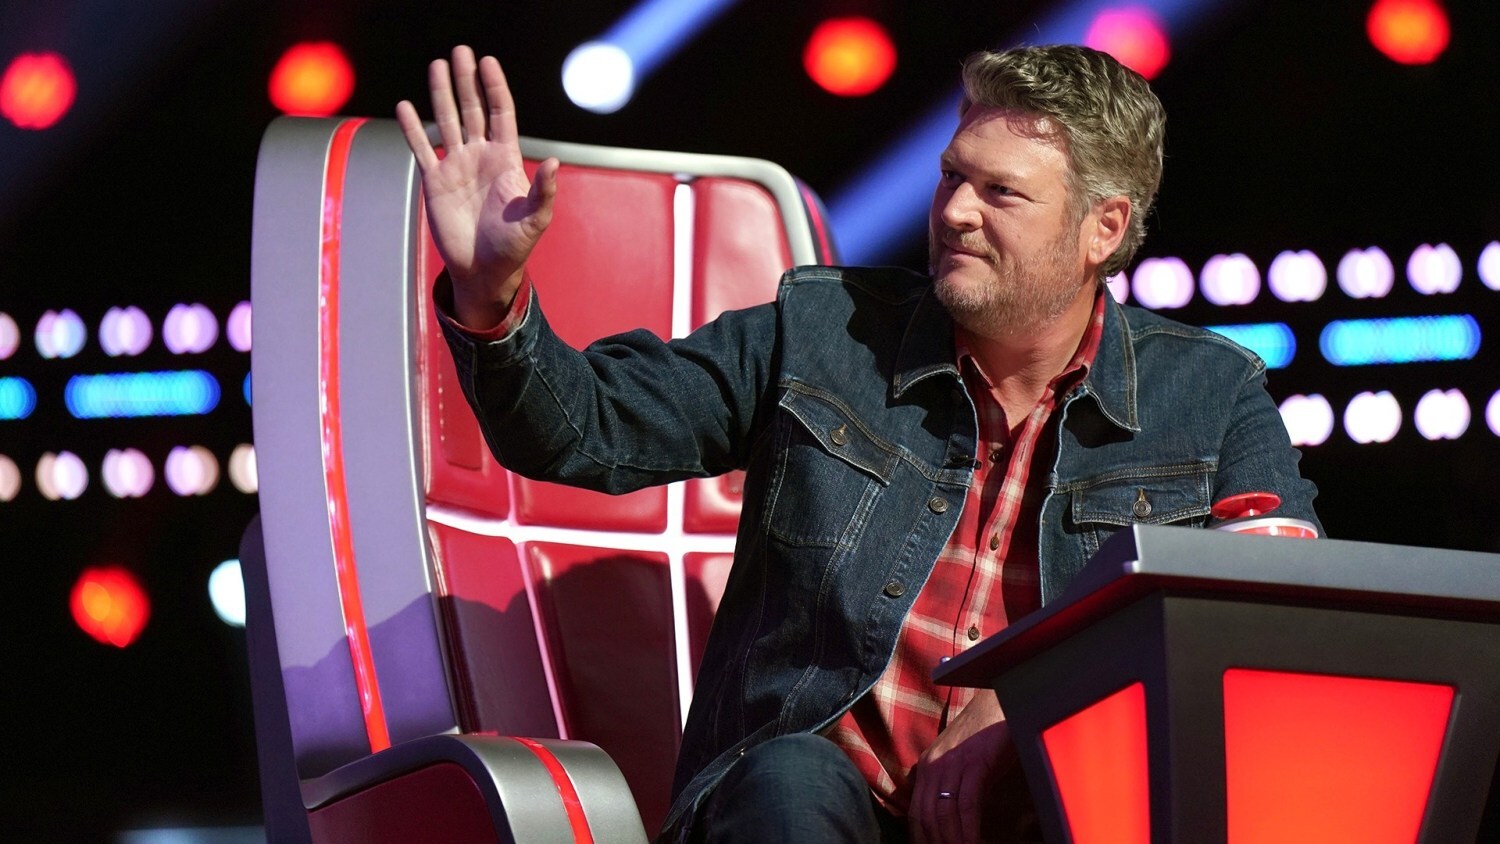 Blake Shelton Announces He Is Leaving ‘The Voice’ After The 23rd Season